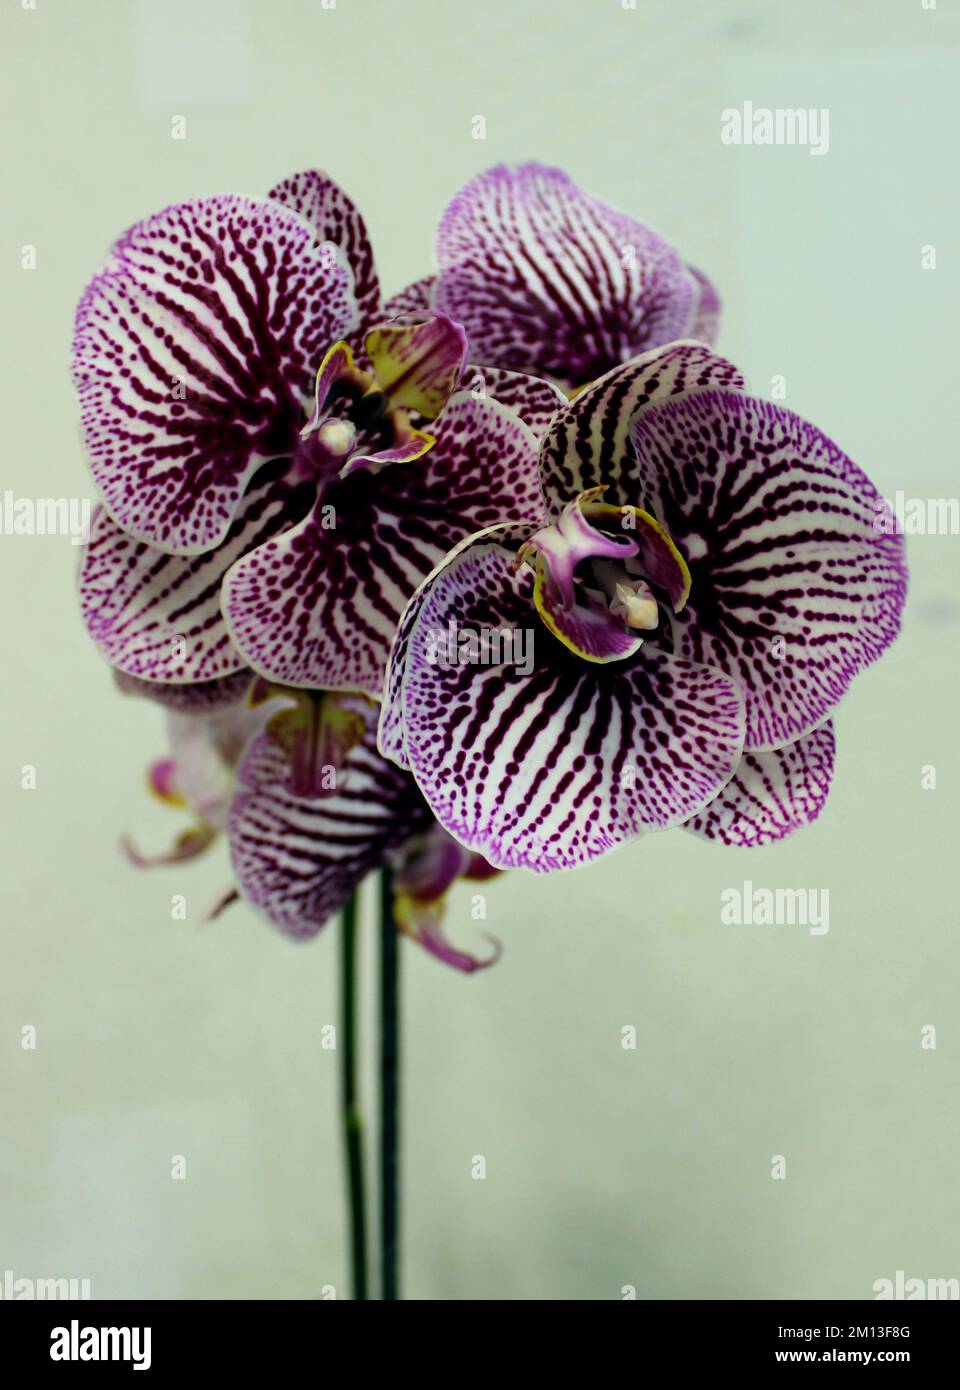 White And Purple Striped Orchid Flowers With Yellow Stamens On A Stem Vertical Stock Photo Stock Photo